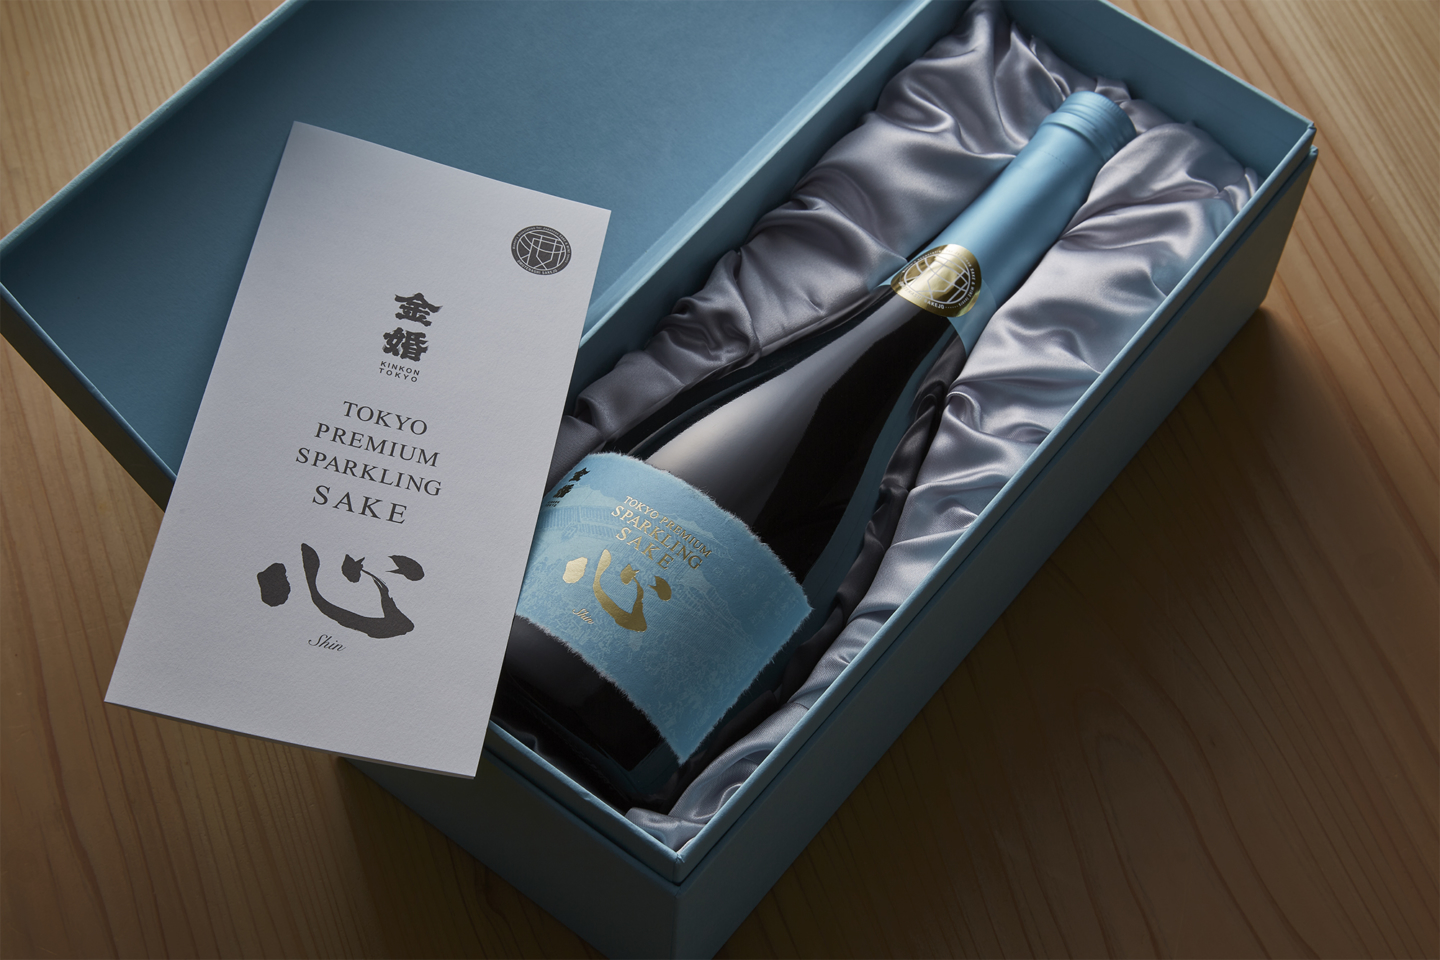 Toshimaya’s “TOKYO PREMIUM SPARKLING SAKE -Shin-” has been selected as one of the “Cuisine Kingdom 100 for 2023”